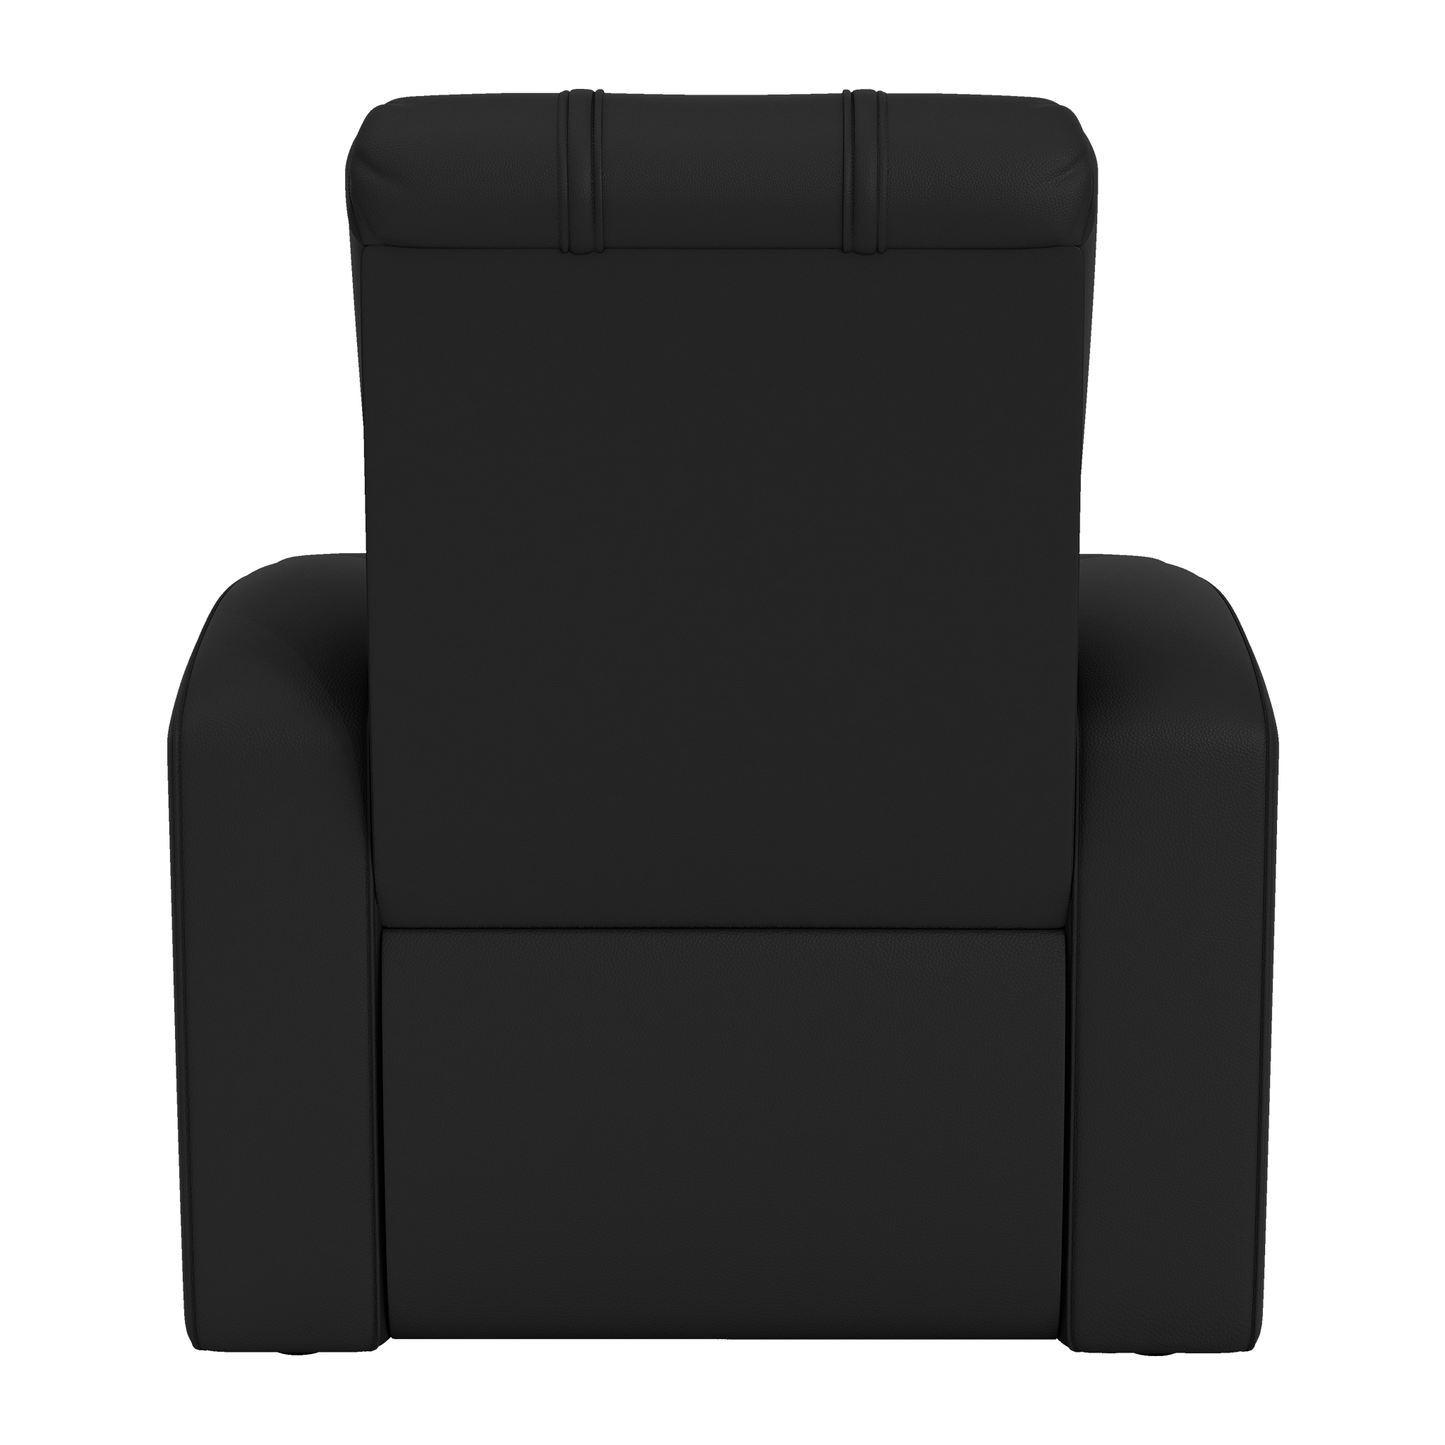 Relax Home Theater Recliner with Buffalo Sabres Logo